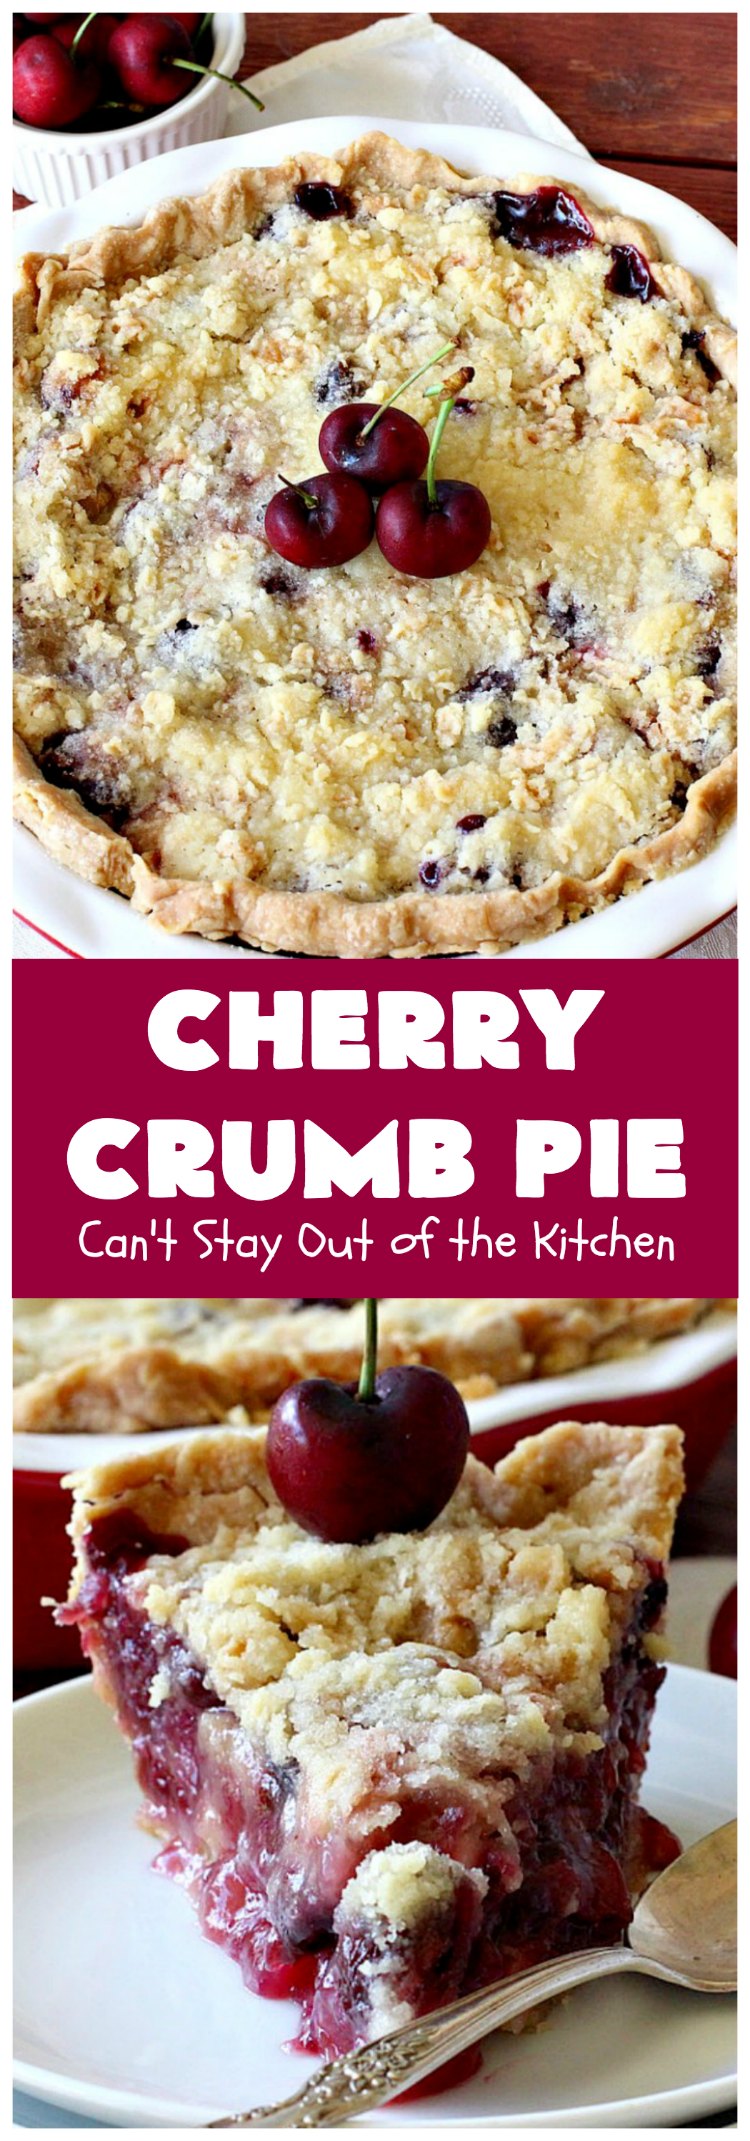 Cherry Crumb Pie | Can't Stay Out of the Kitchen